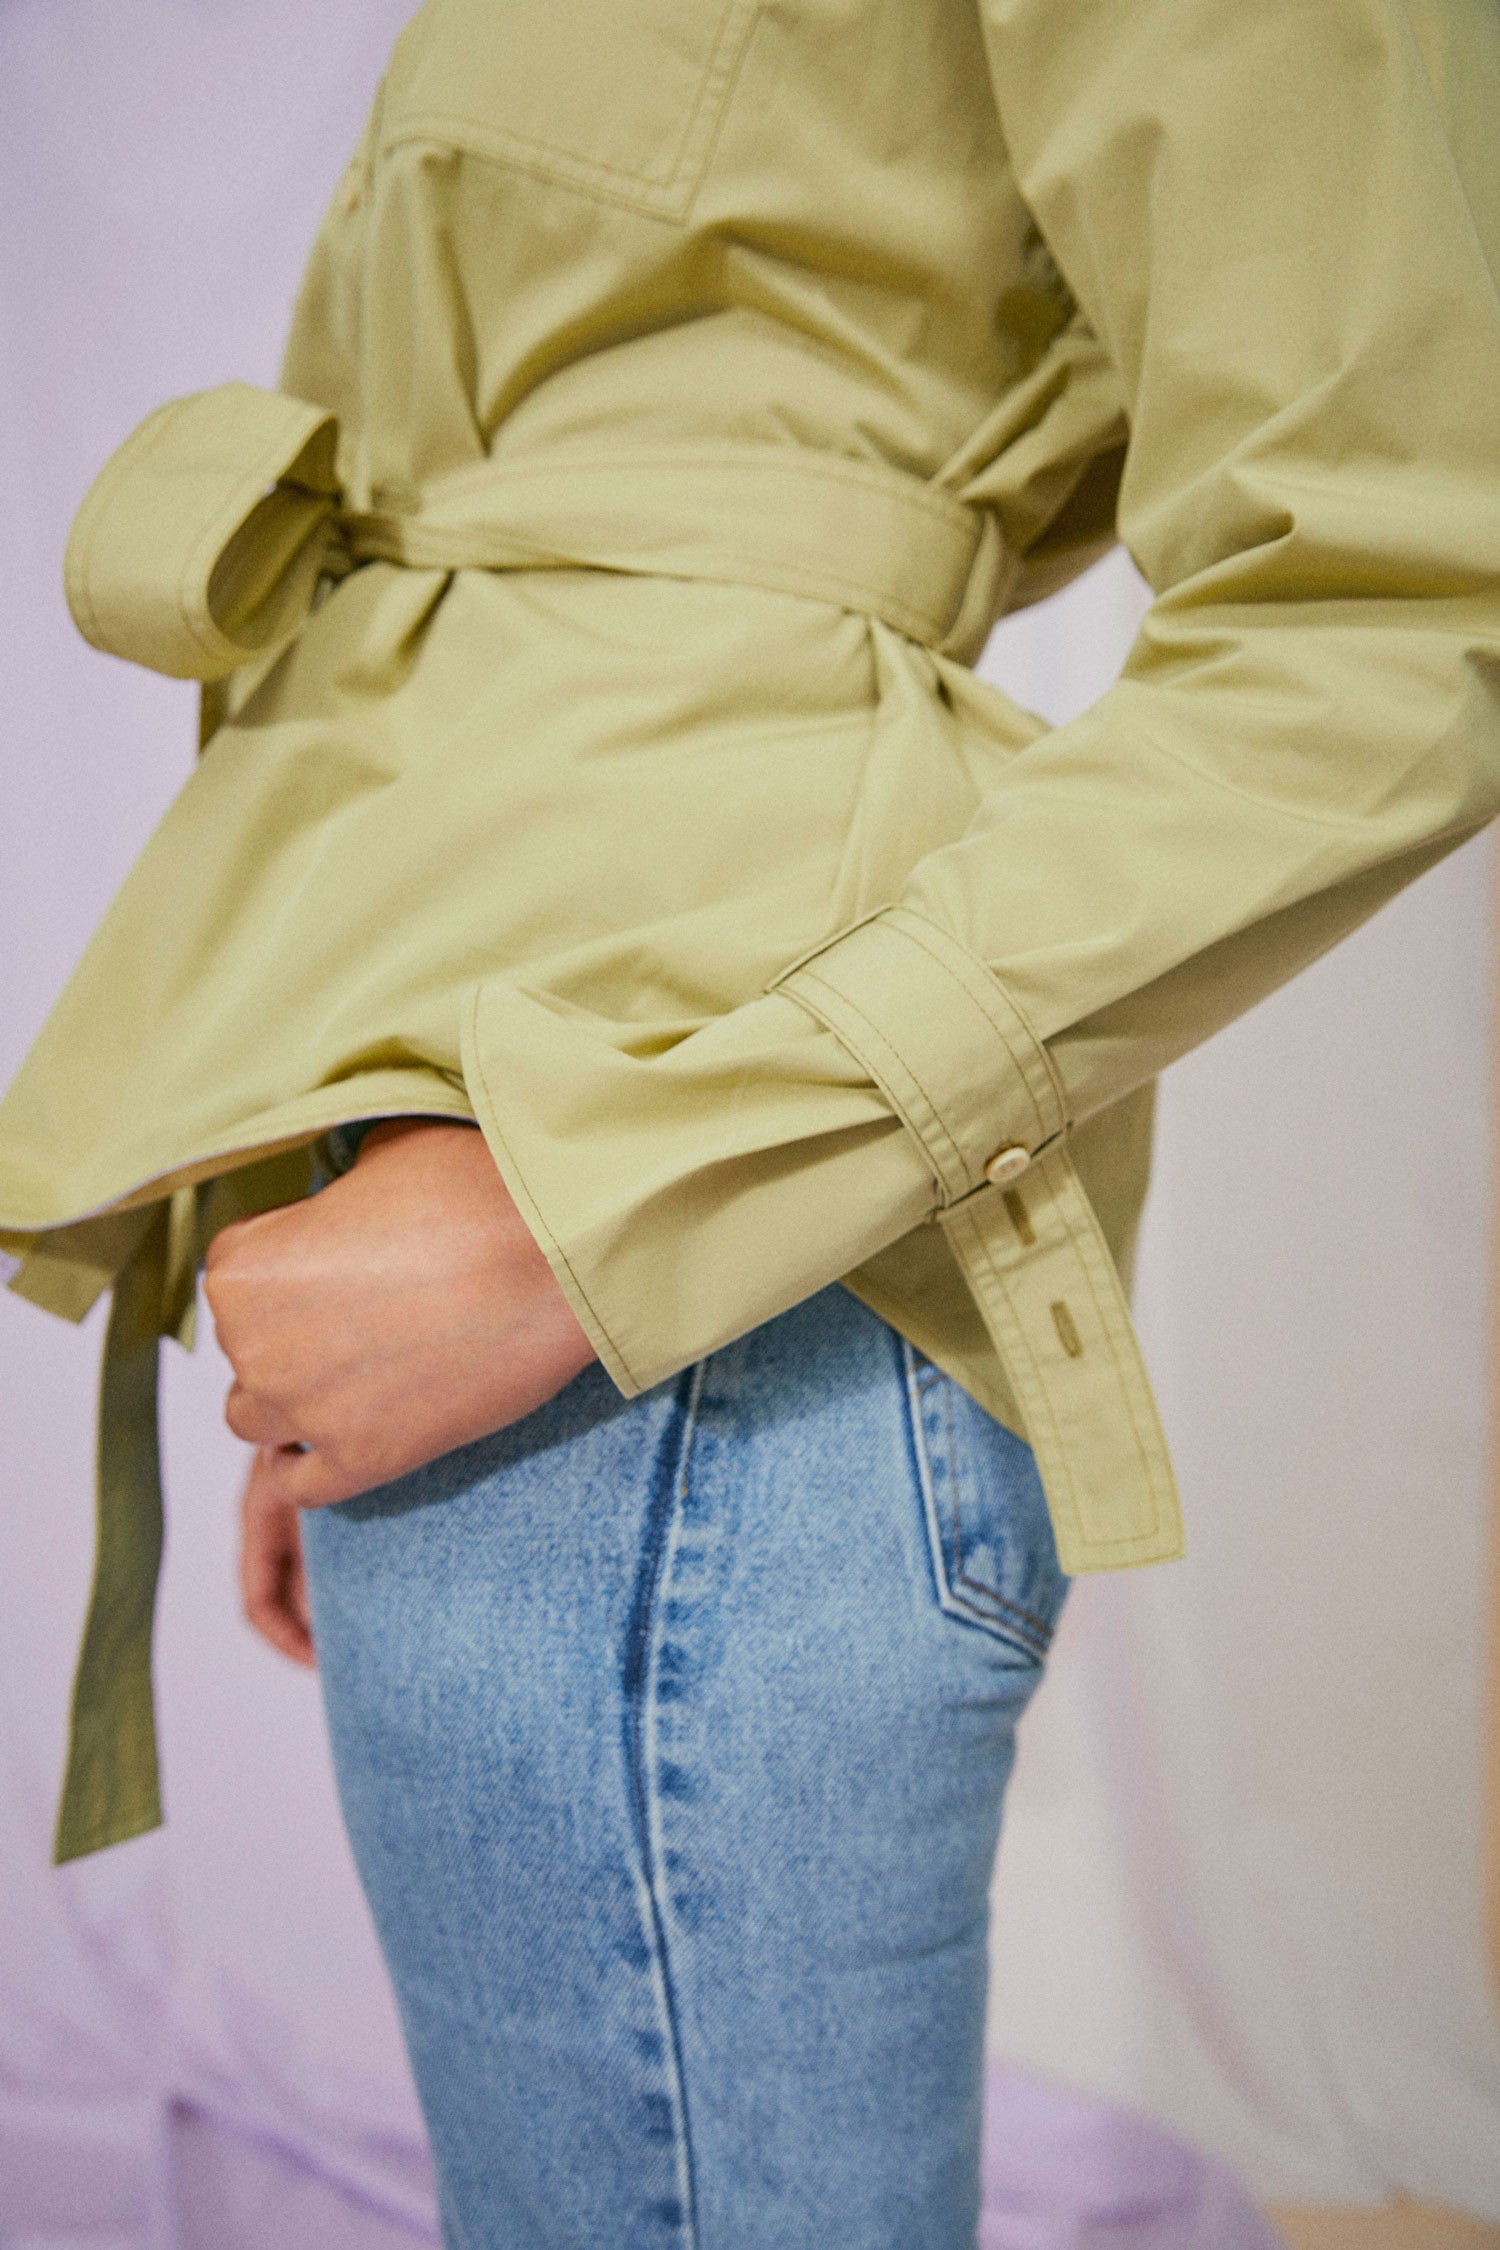 Womens Oversized Shirt in khaki olive, with detachable tie belt and safari styling details. Belted cuffs for sleeve details and utility patch pockets. Zadie Boyfriend Shirt by Saywood. Close up of sleeves and tie belt details.